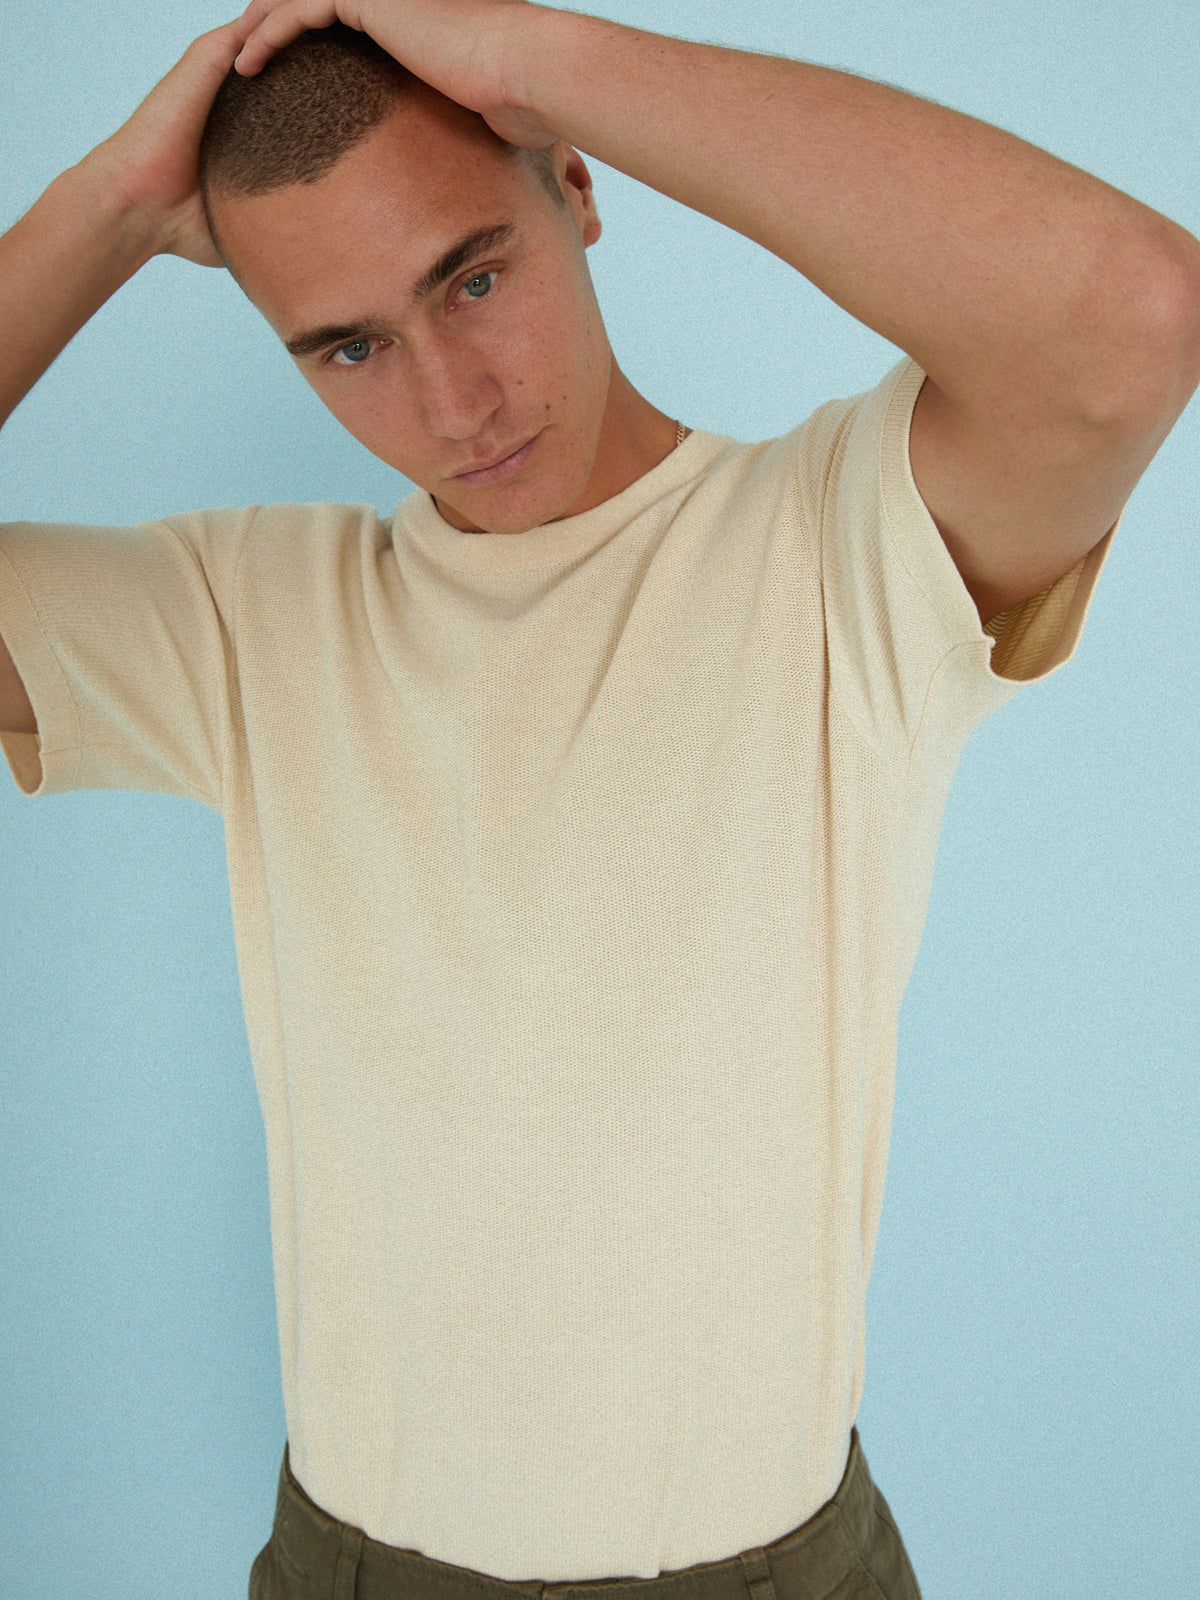 Hector Knit T-Shirt in Pearl